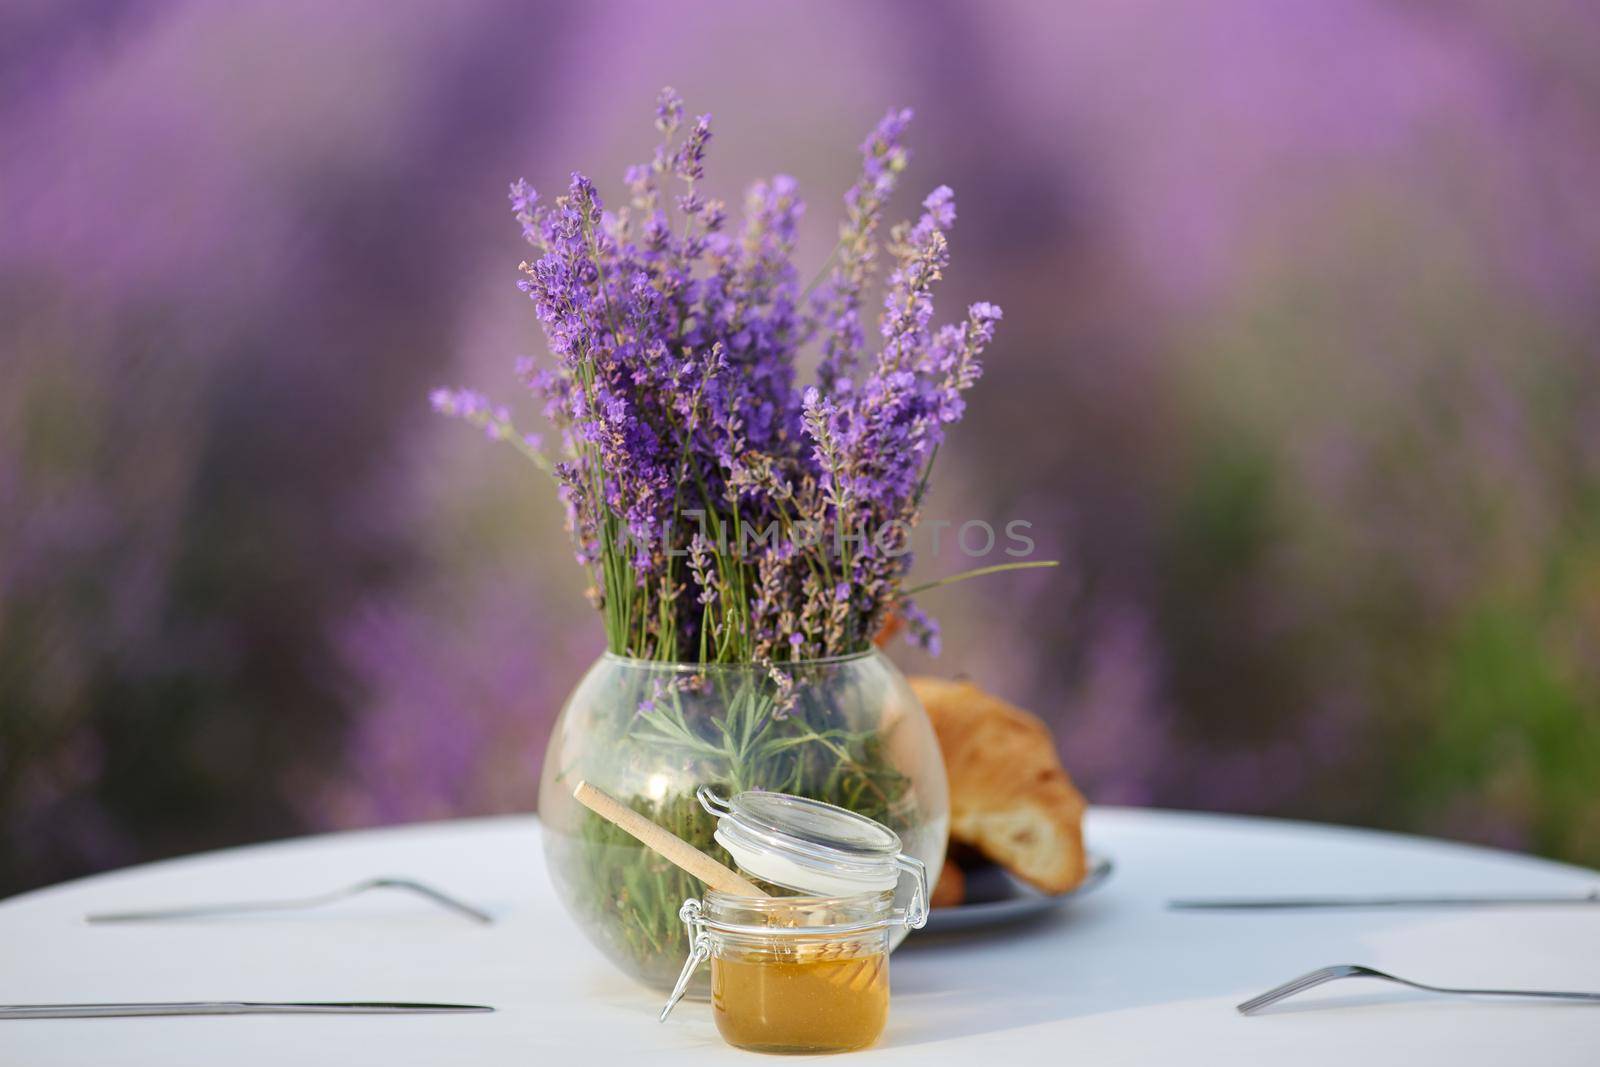 White wooden table decorated with fresh delicious croissants, honey jar with wooden spoon and glass vase with lavender bouquet. Beautiful decoration in lavender field full of blooming purple flowers.